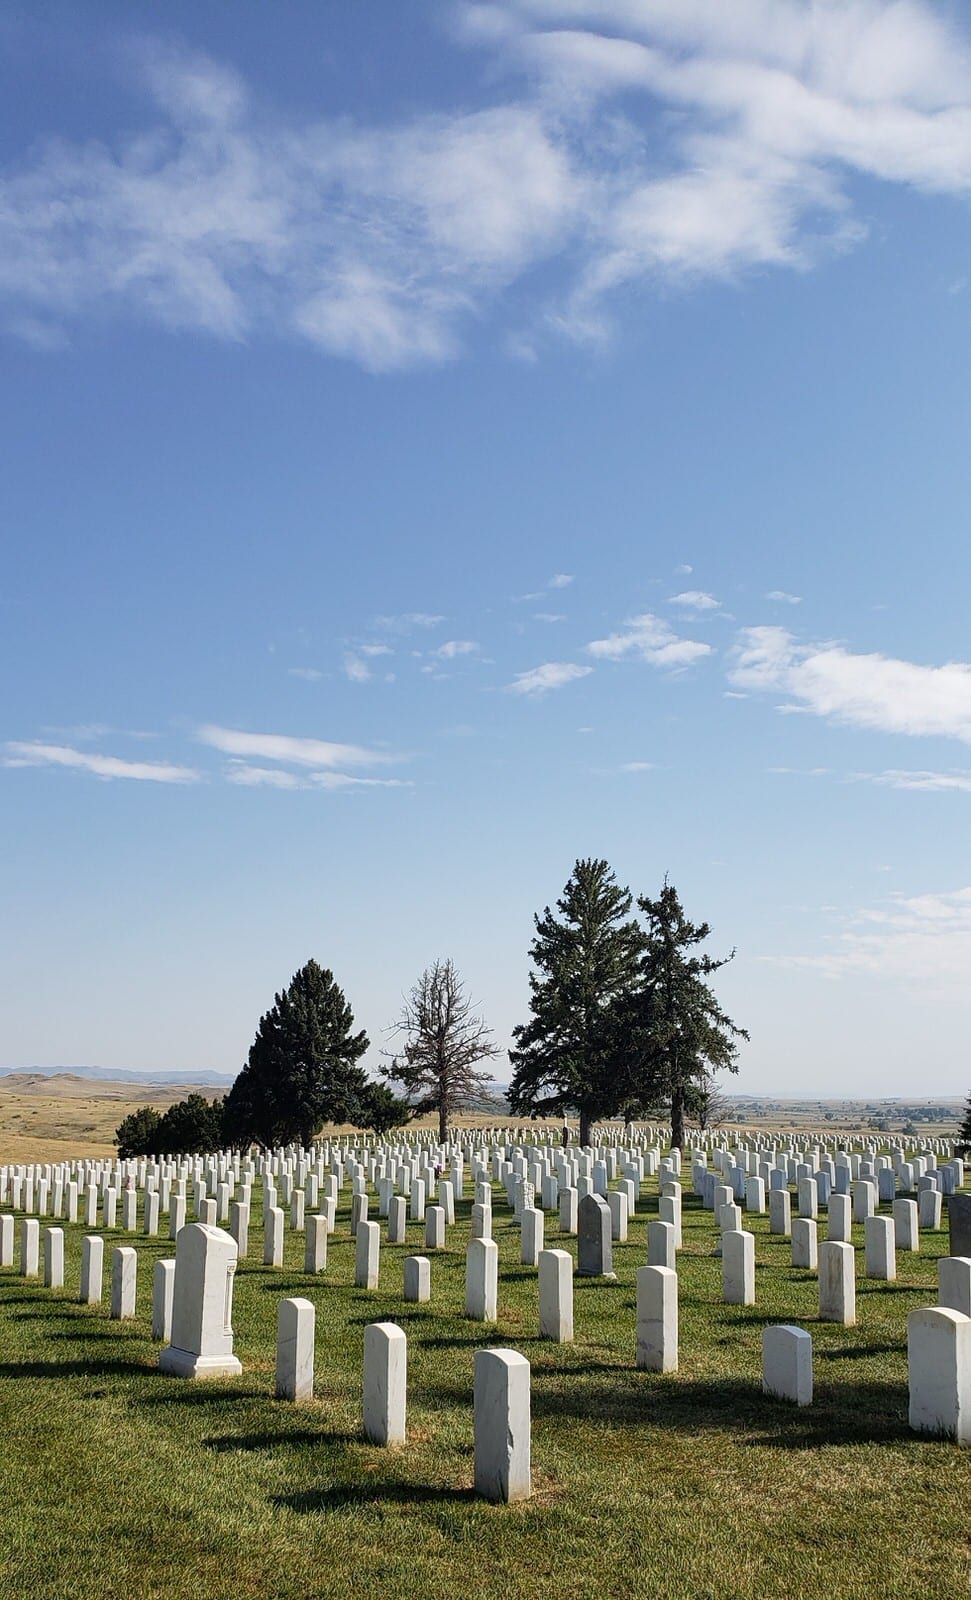 Little Bighorn National Park, Custer's Last Stand